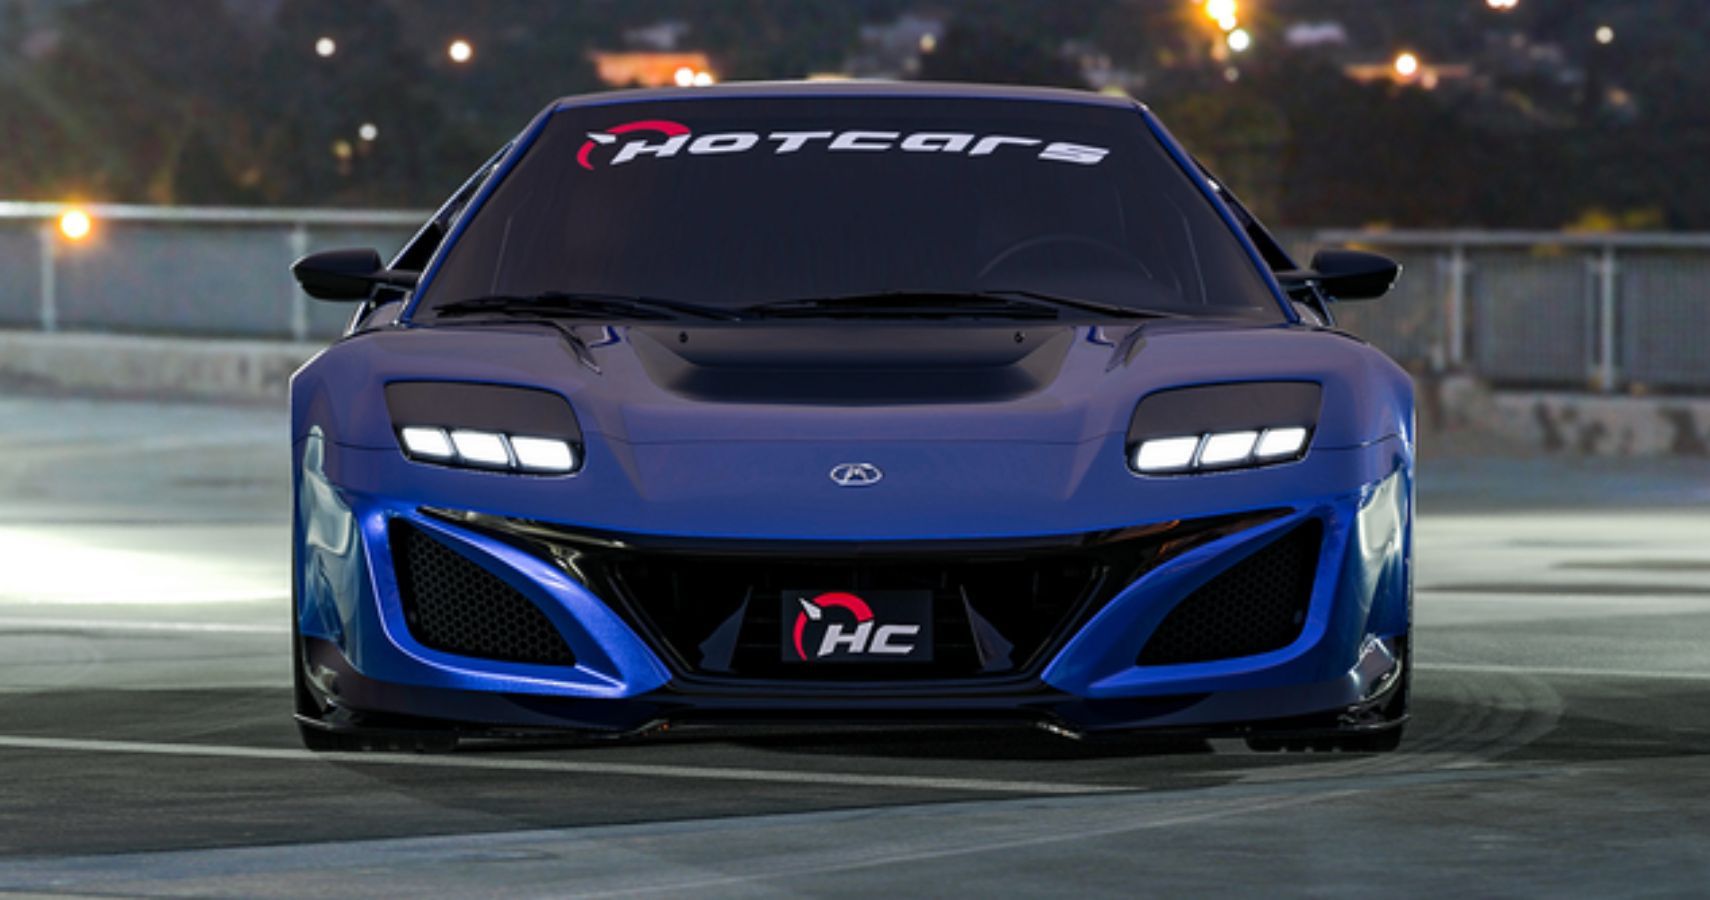 This 2002 Acura NSX Type-S Restomod Looks Ready For A Debut In The Next Fast And Furious Film